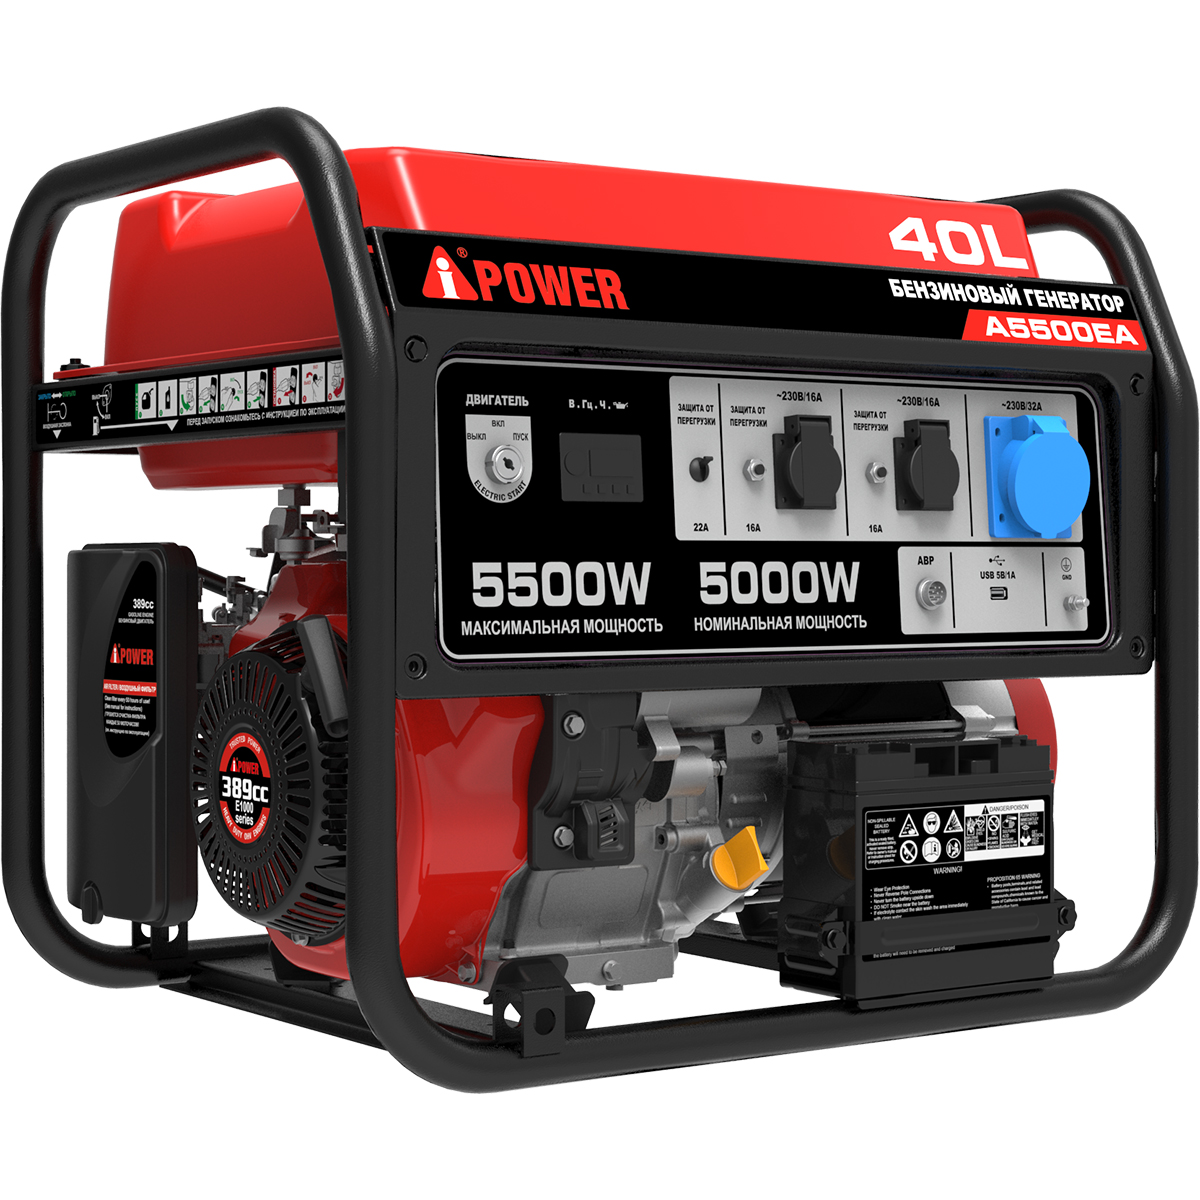   A-iPower A5500EA 20106